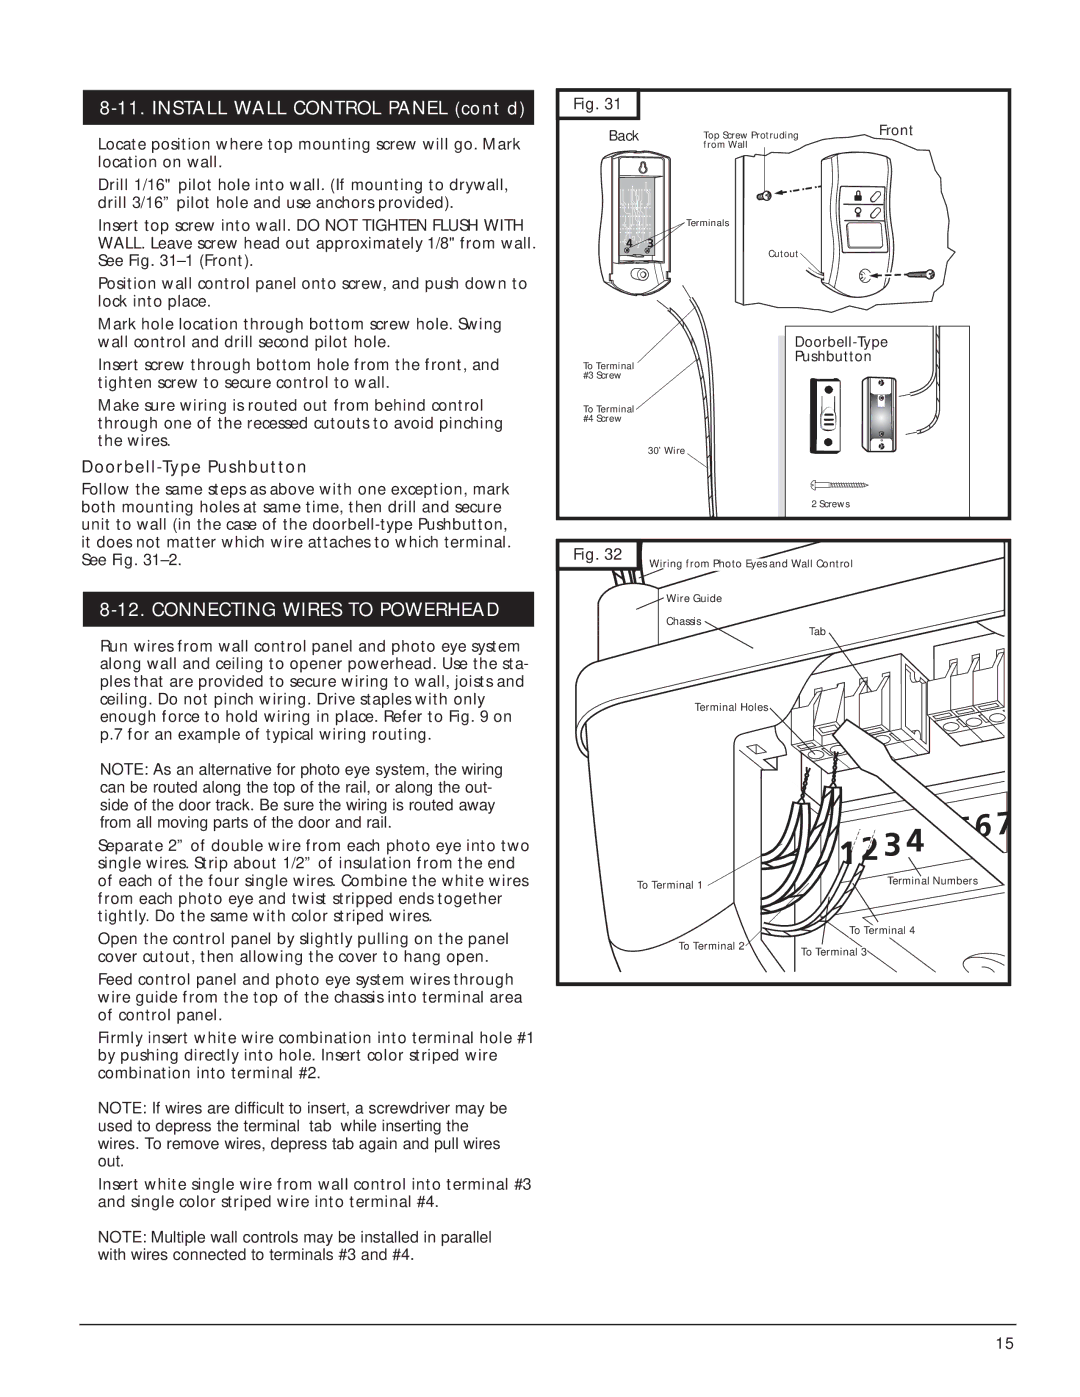 Genie M-4700, M-4500 owner manual Connecting Wires to Powerhead, Doorbell-Type Pushbutton 